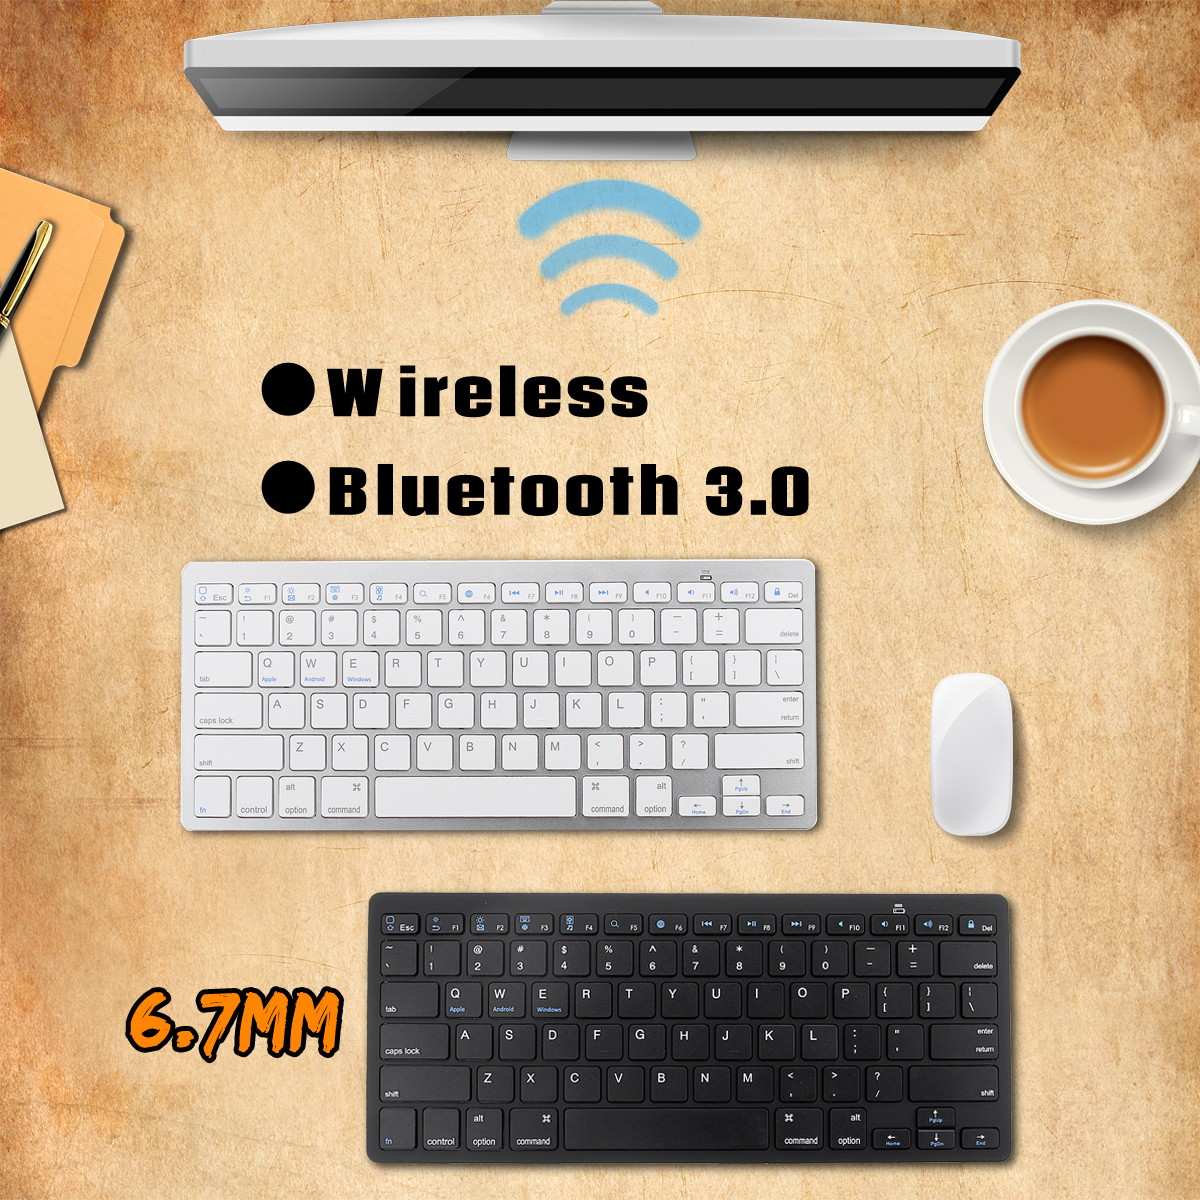 Wirelss-Bluetooth-30-Keyboard-For-iPhone-iPad-Macbook-Samsung-Tablet-PC-iOS-Android-Devices-1234784